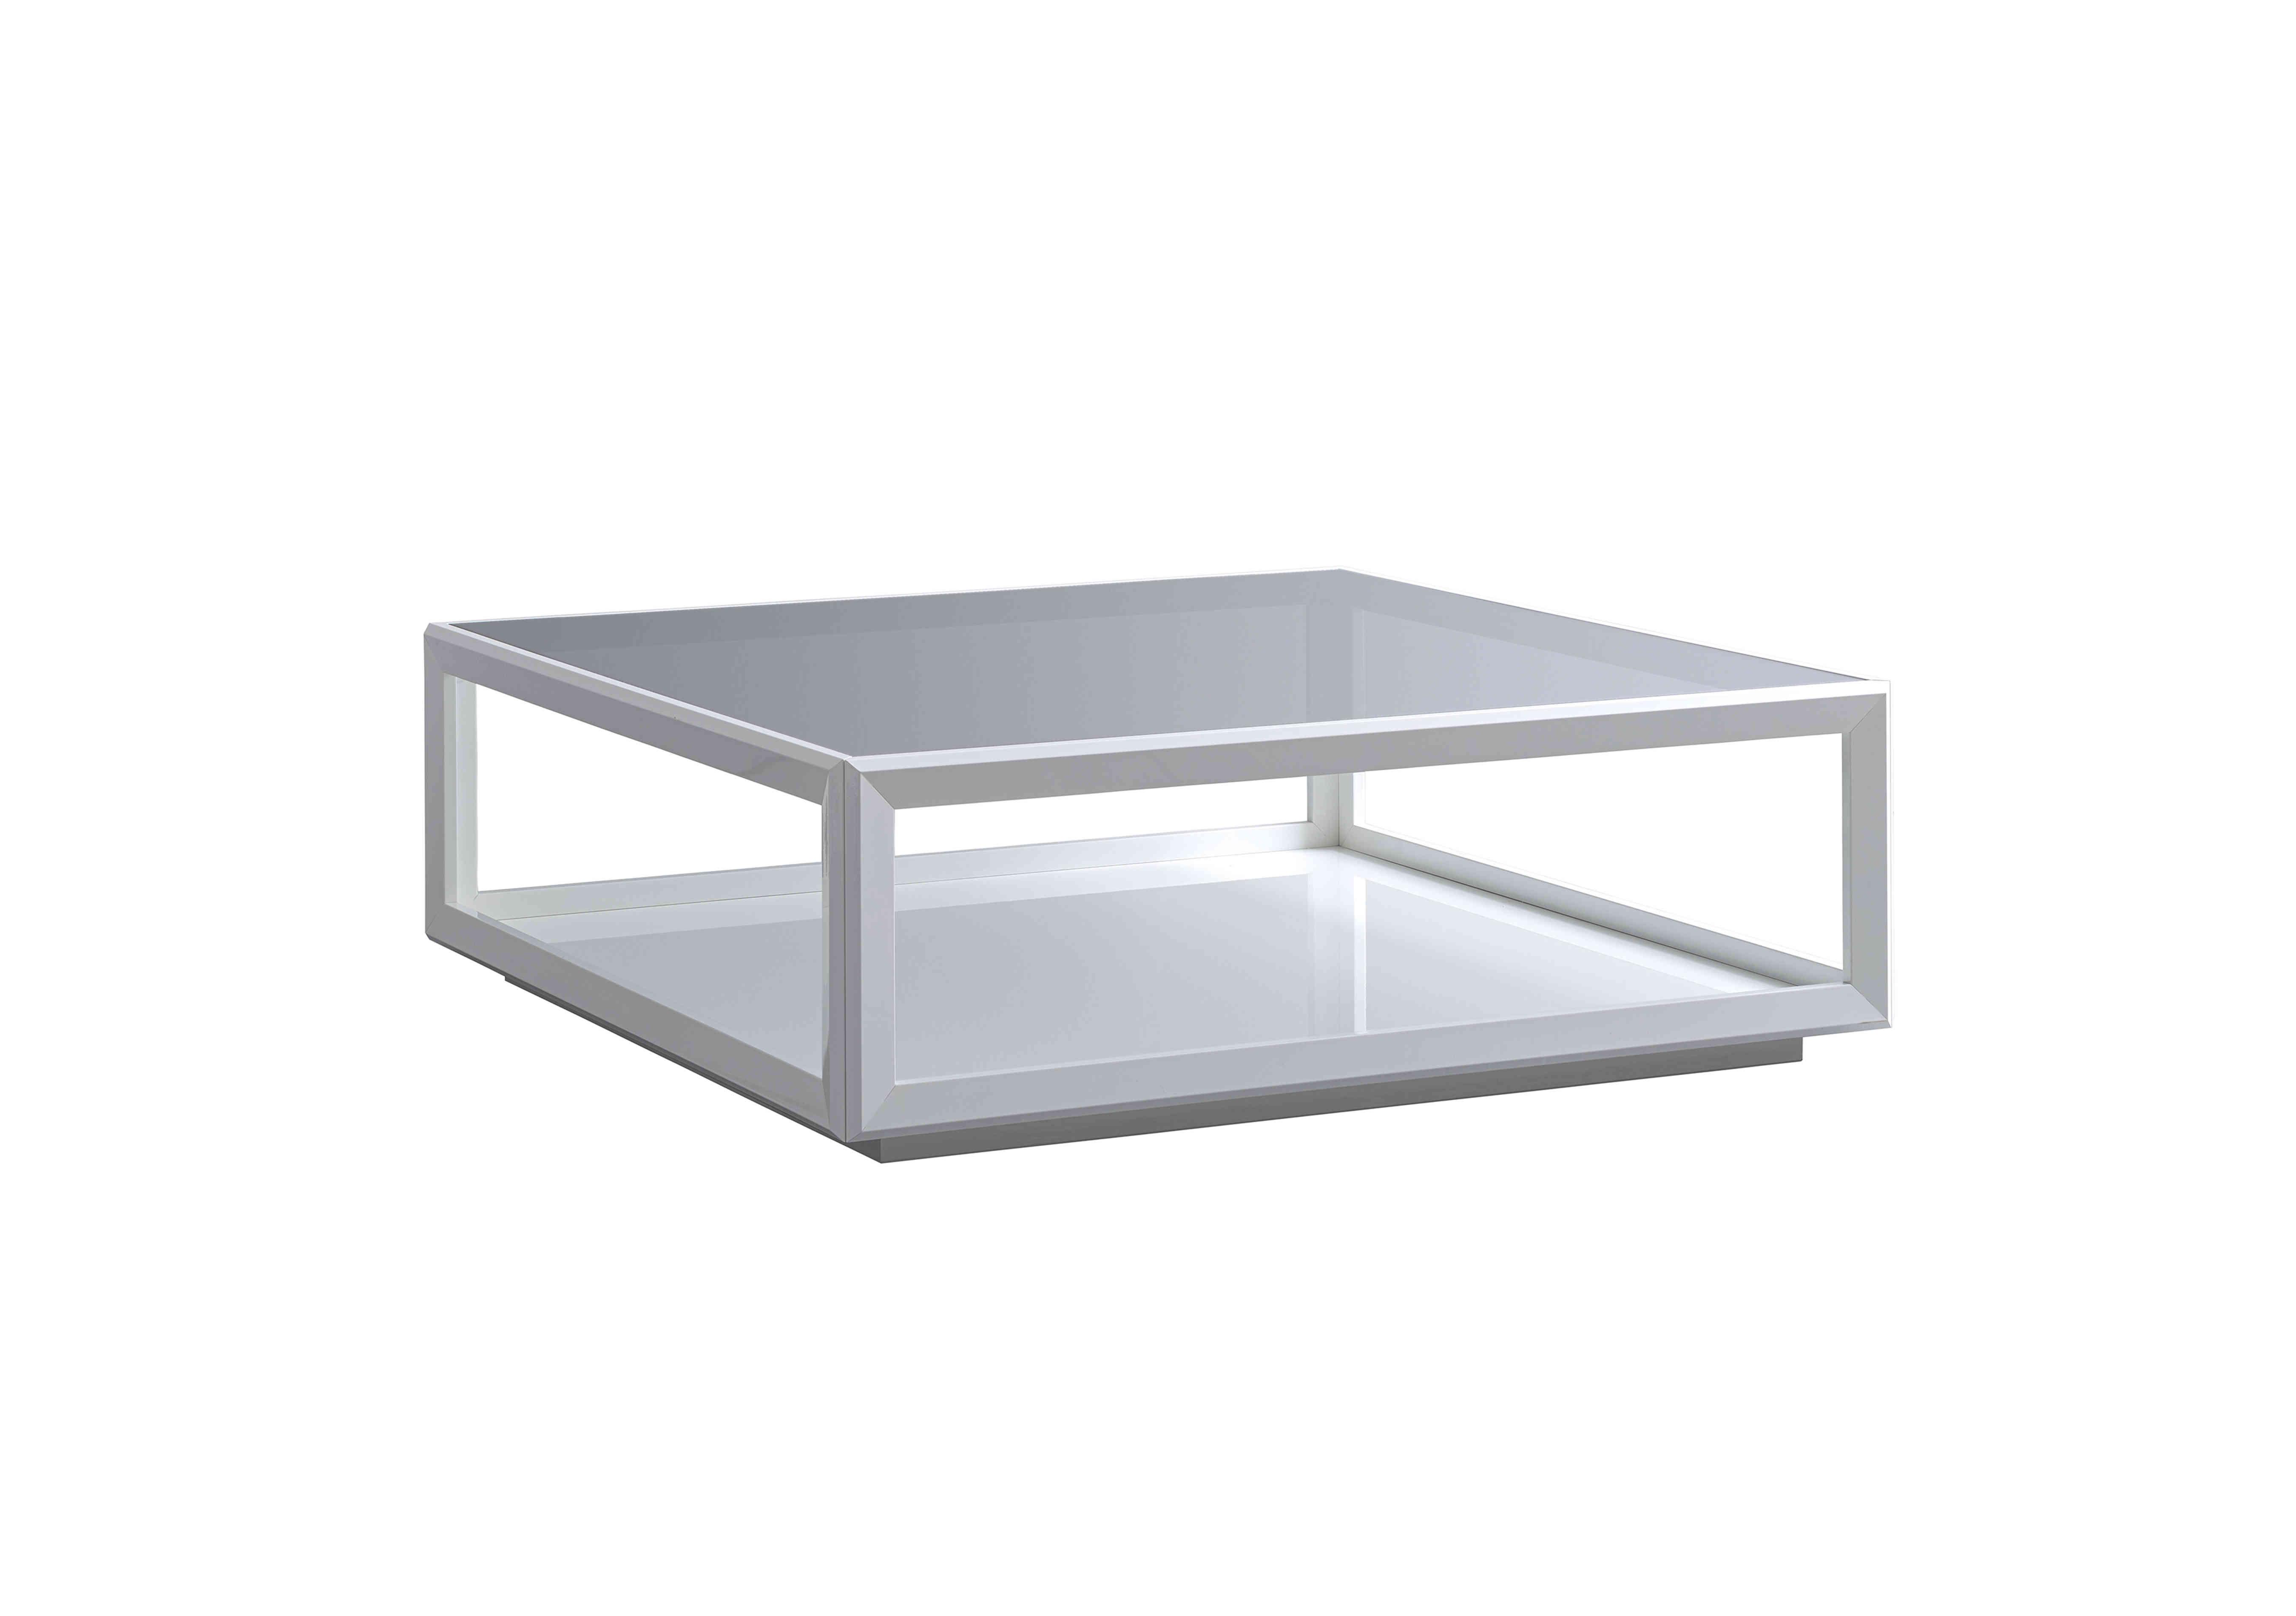 Palazzo Square Coffee Table in Glossy White on Furniture Village